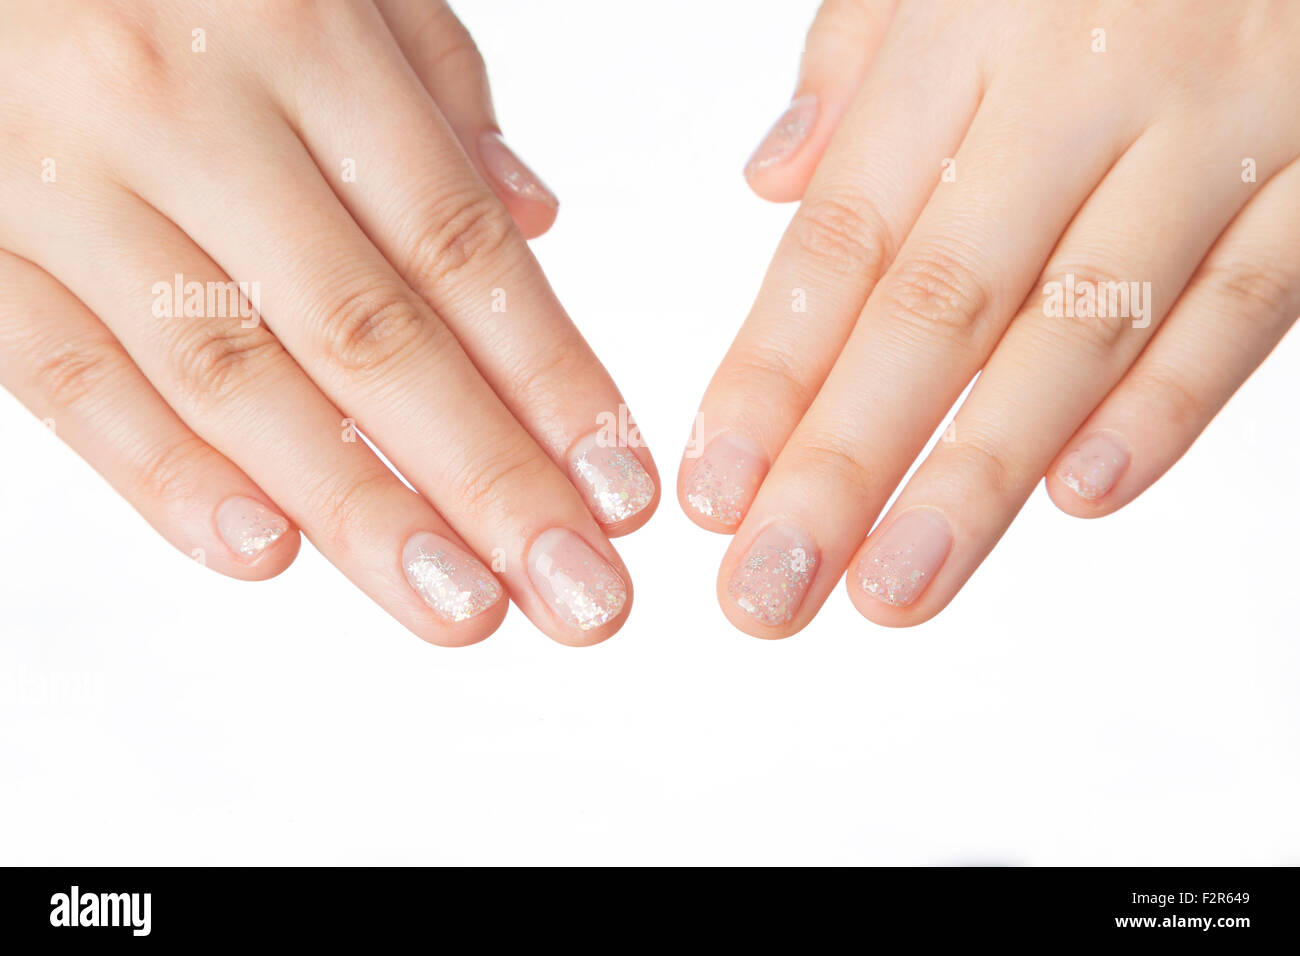 Beautiful woman's nails with manicure on white background Stock Photo